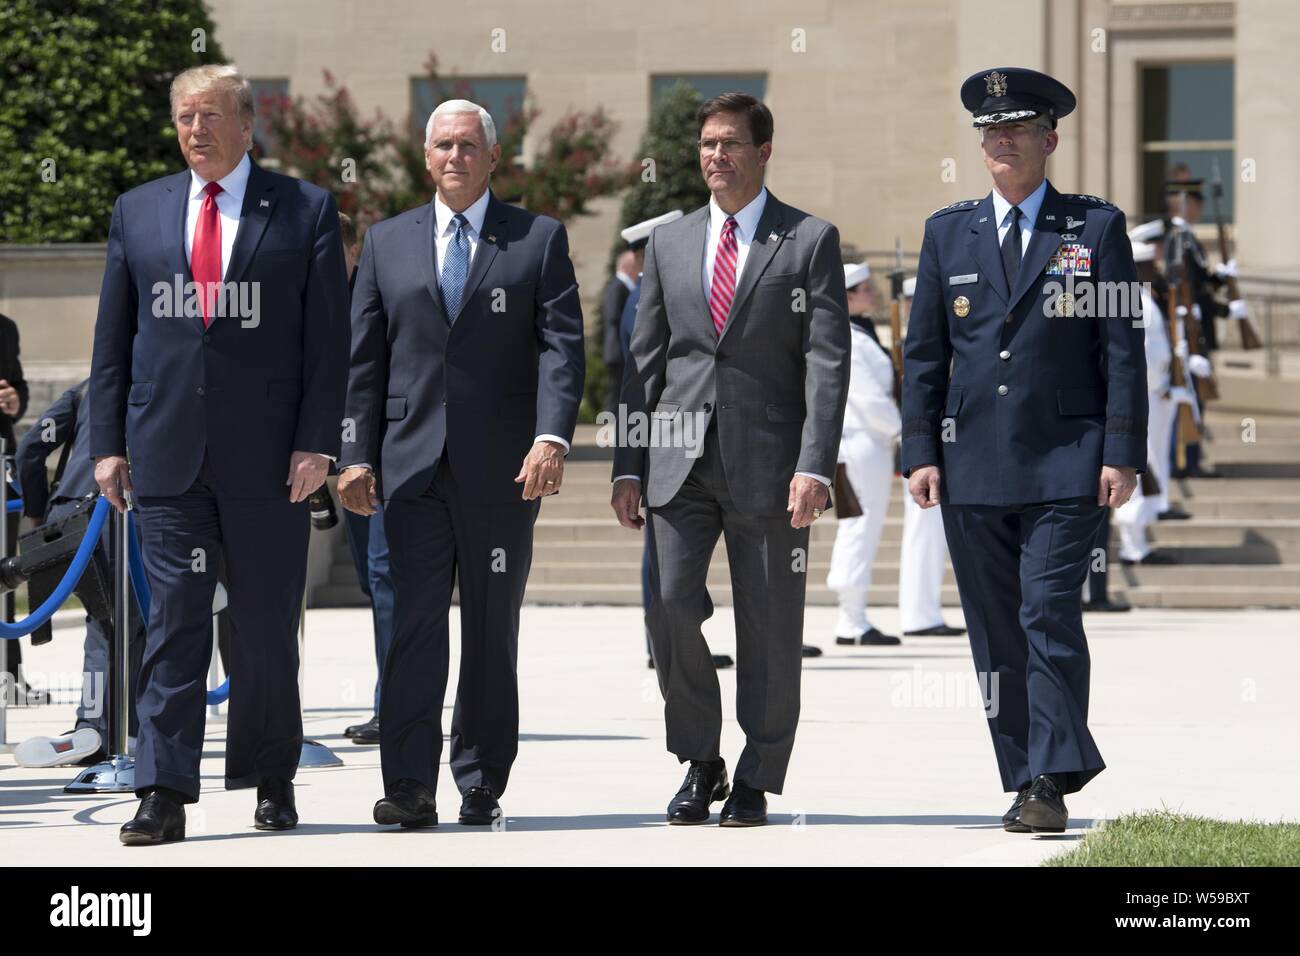 U.S. President Donald J. Trump, Vice President Mike Pence, Secretary of Defense Dr. Mark T. Esper and Vice Chairman of the Joint Chiefs of Staff Air Force General Paul J. Selva arrive for a Full Honors Welcome Ceremony for Esper, at the Pentagon, Washington, D.C. July 25, 2019, July 25, 2019. (DoD photo by Lisa Ferdinando). () Stock Photo